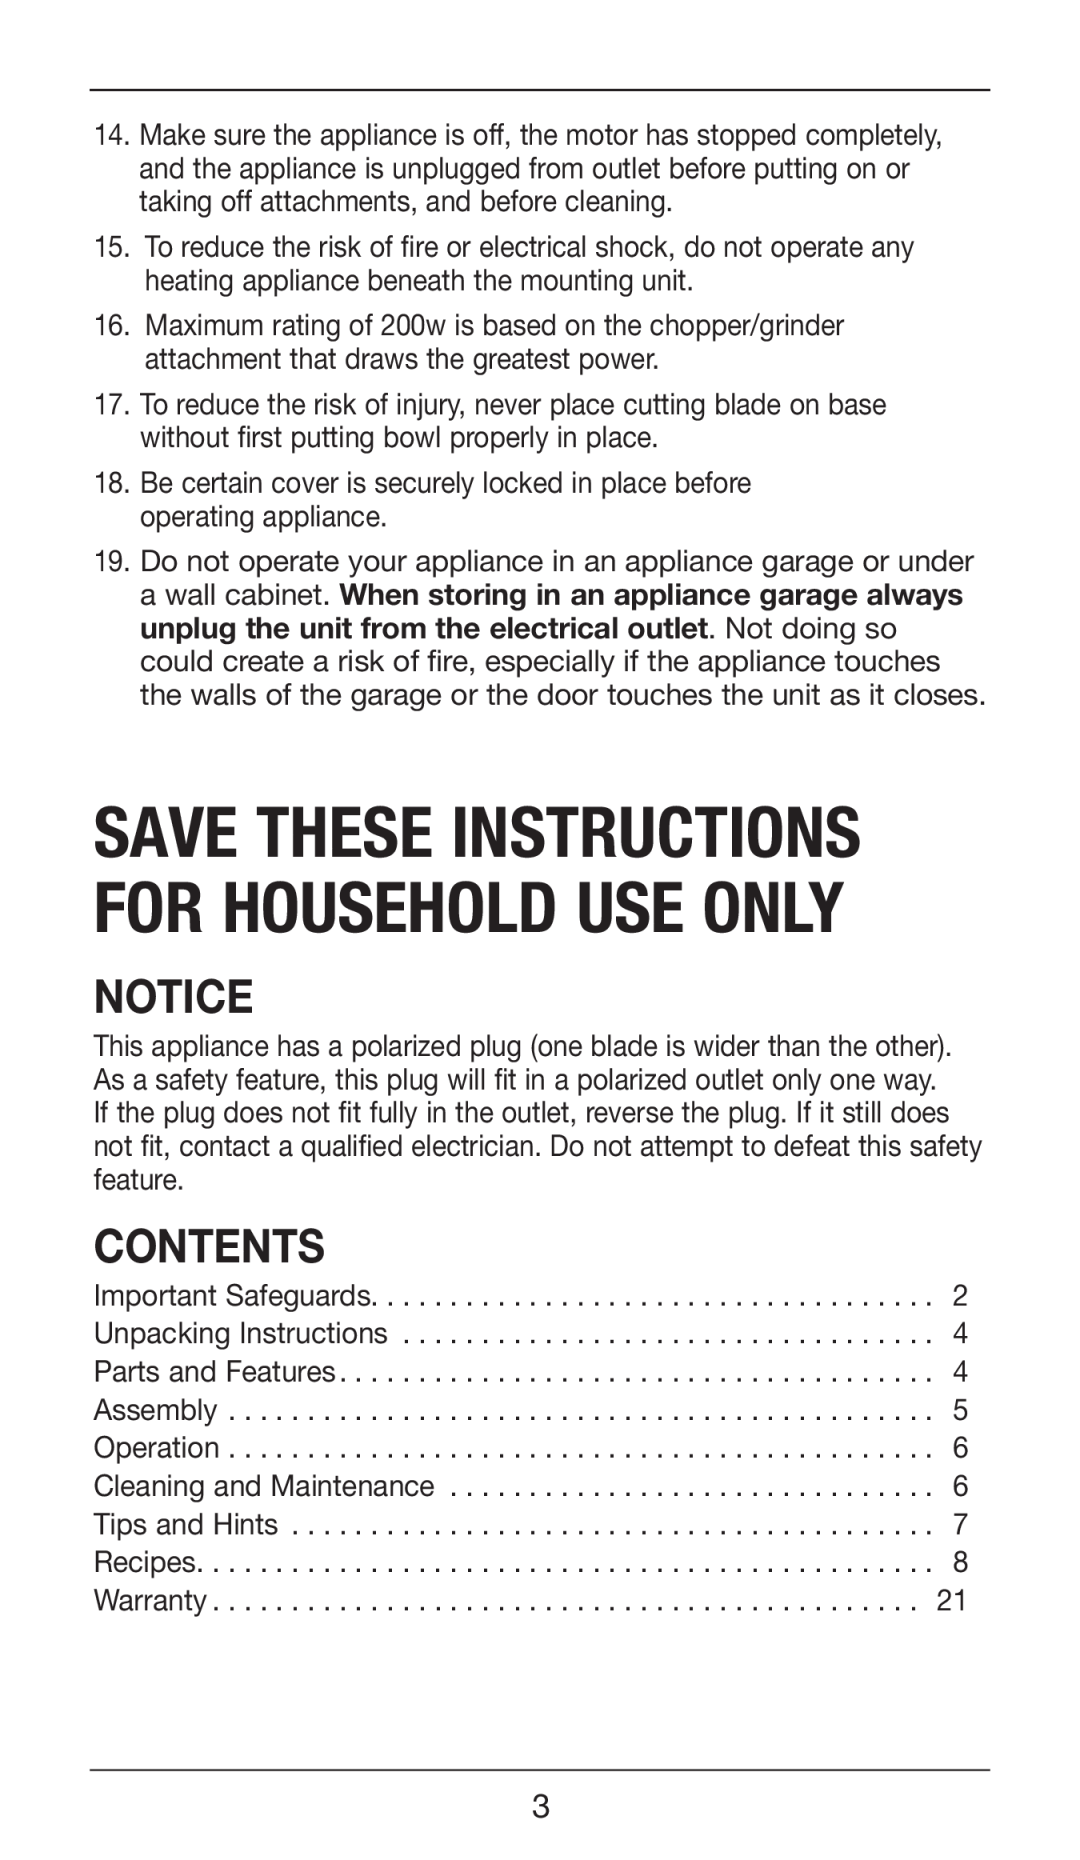 Cuisinart CSB-75 manual Contents, Save These Instructions For Household Use Only 